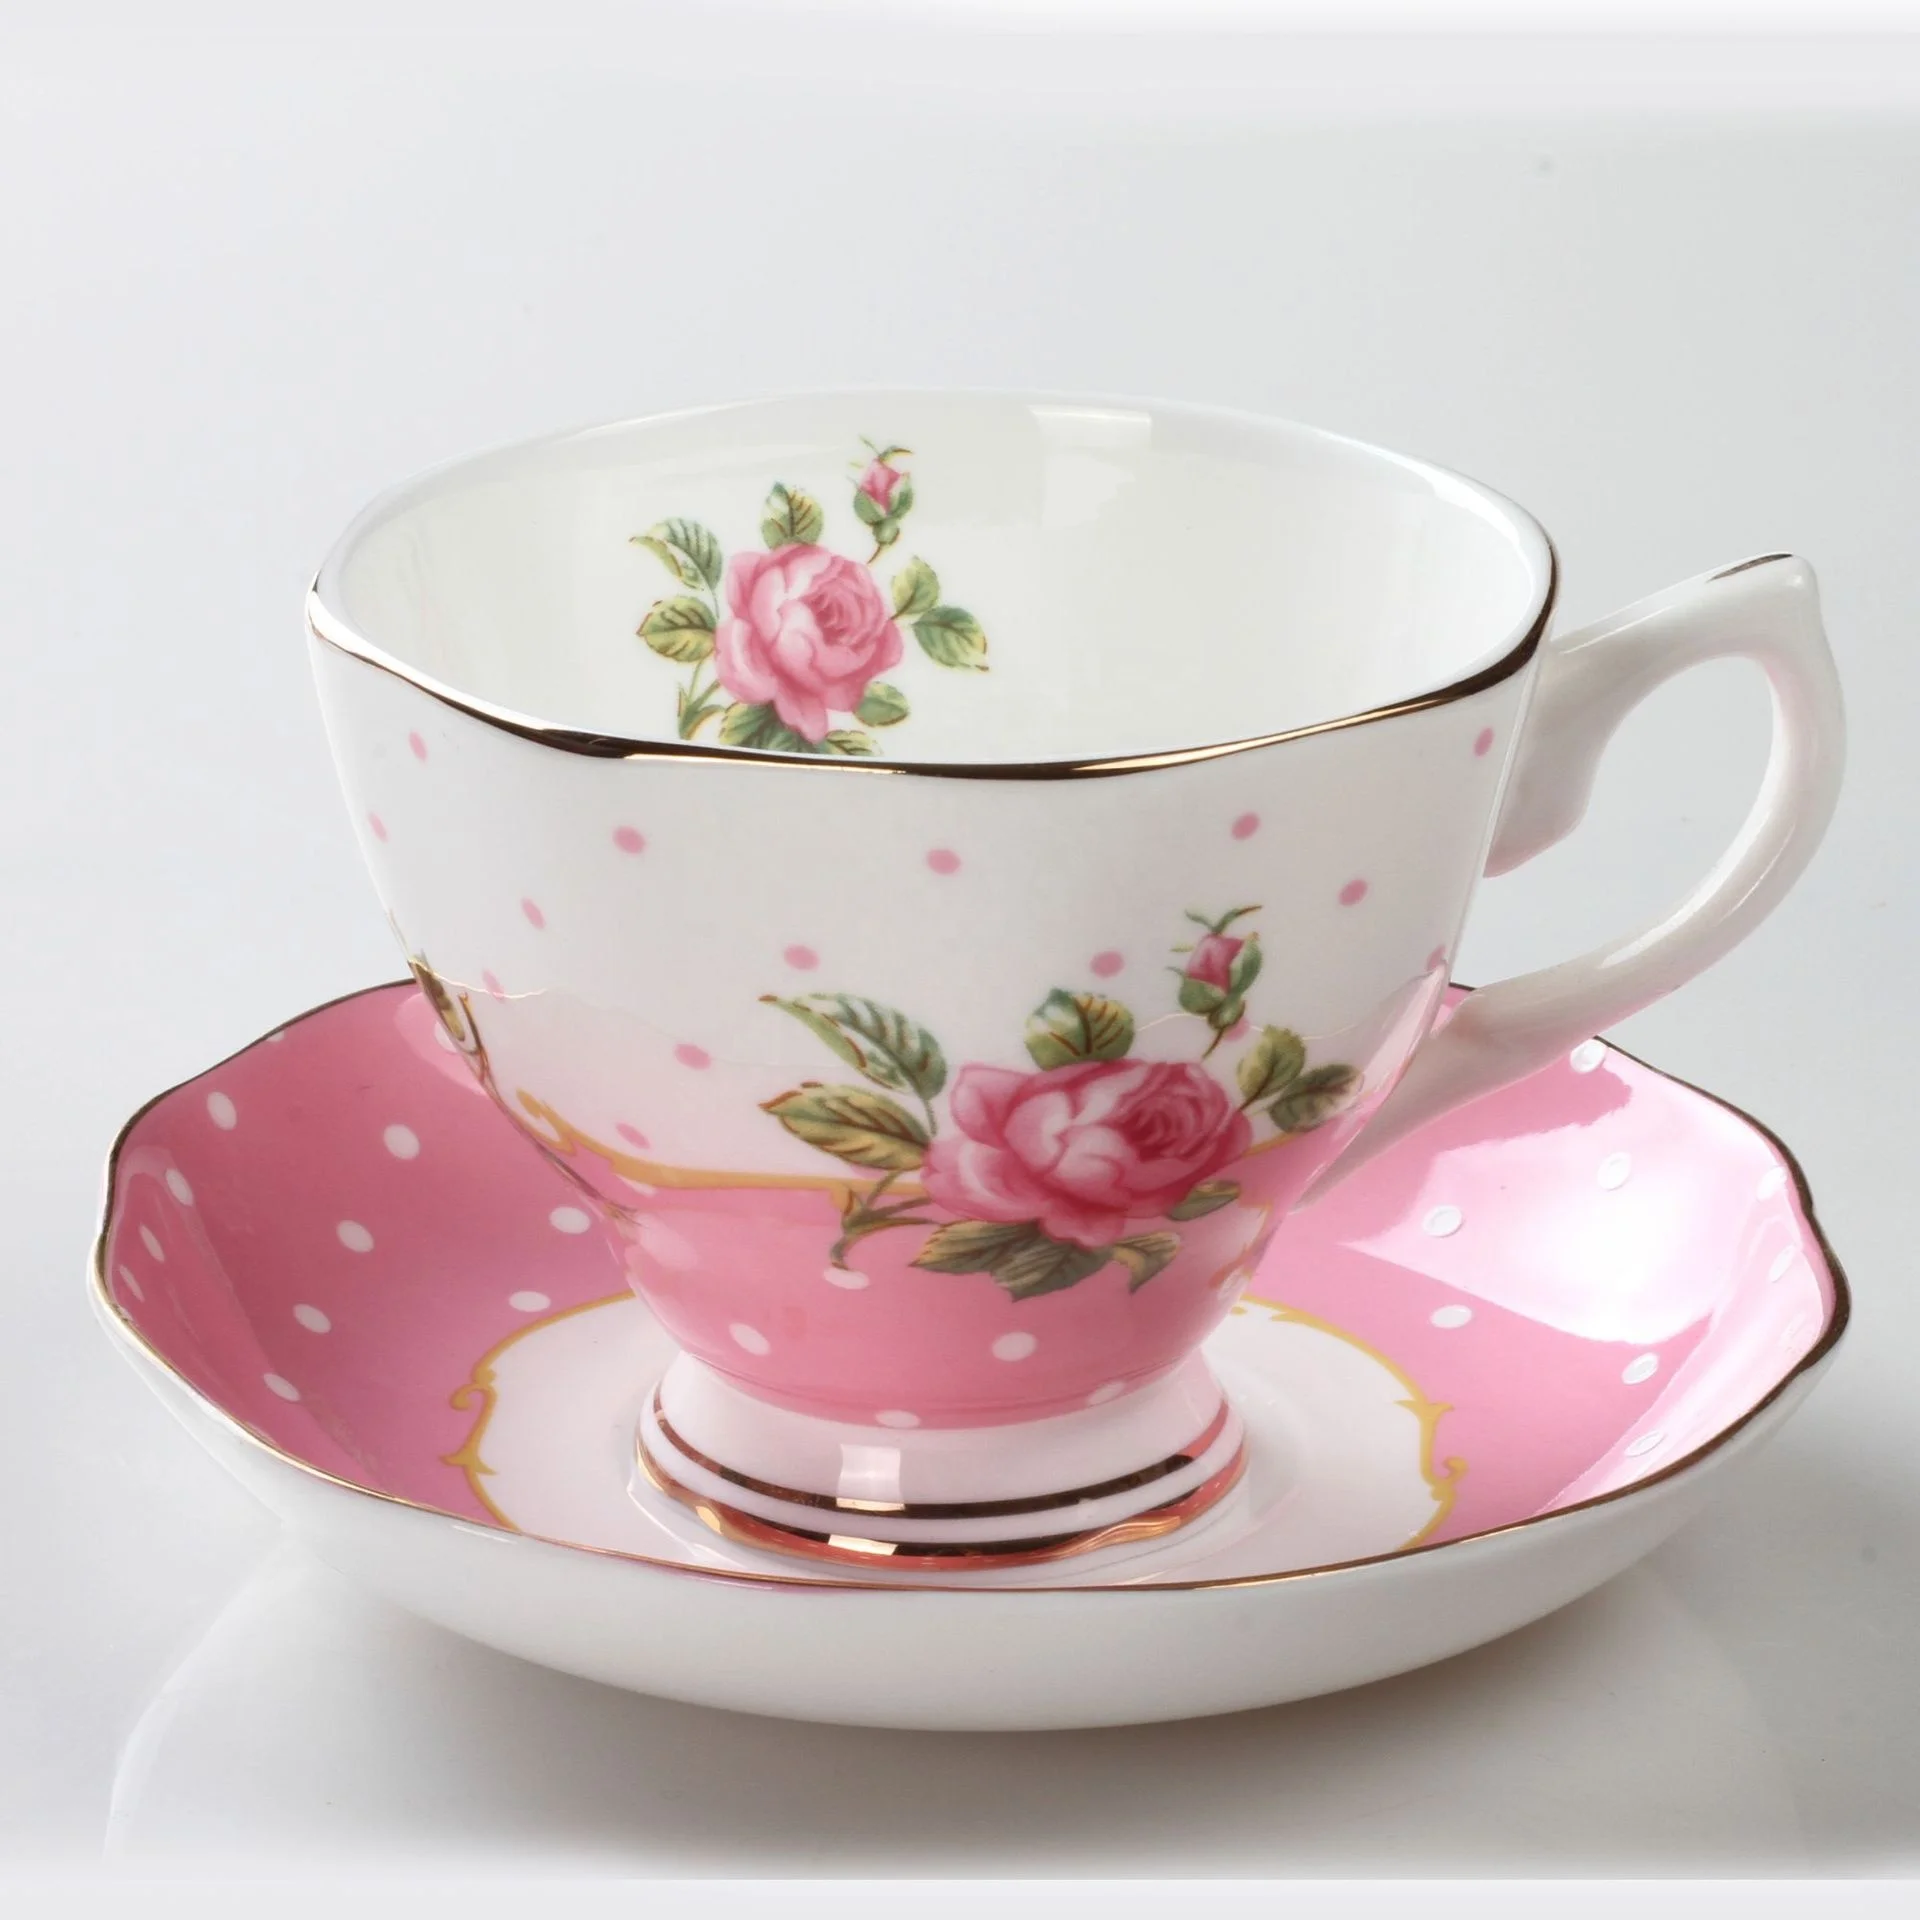 

Hot Sale Romantic Style Ceramic Cup Bone China Royal Coffee Cups Rose Formal Boxed Tea Cups and Saucers Set, Full decal